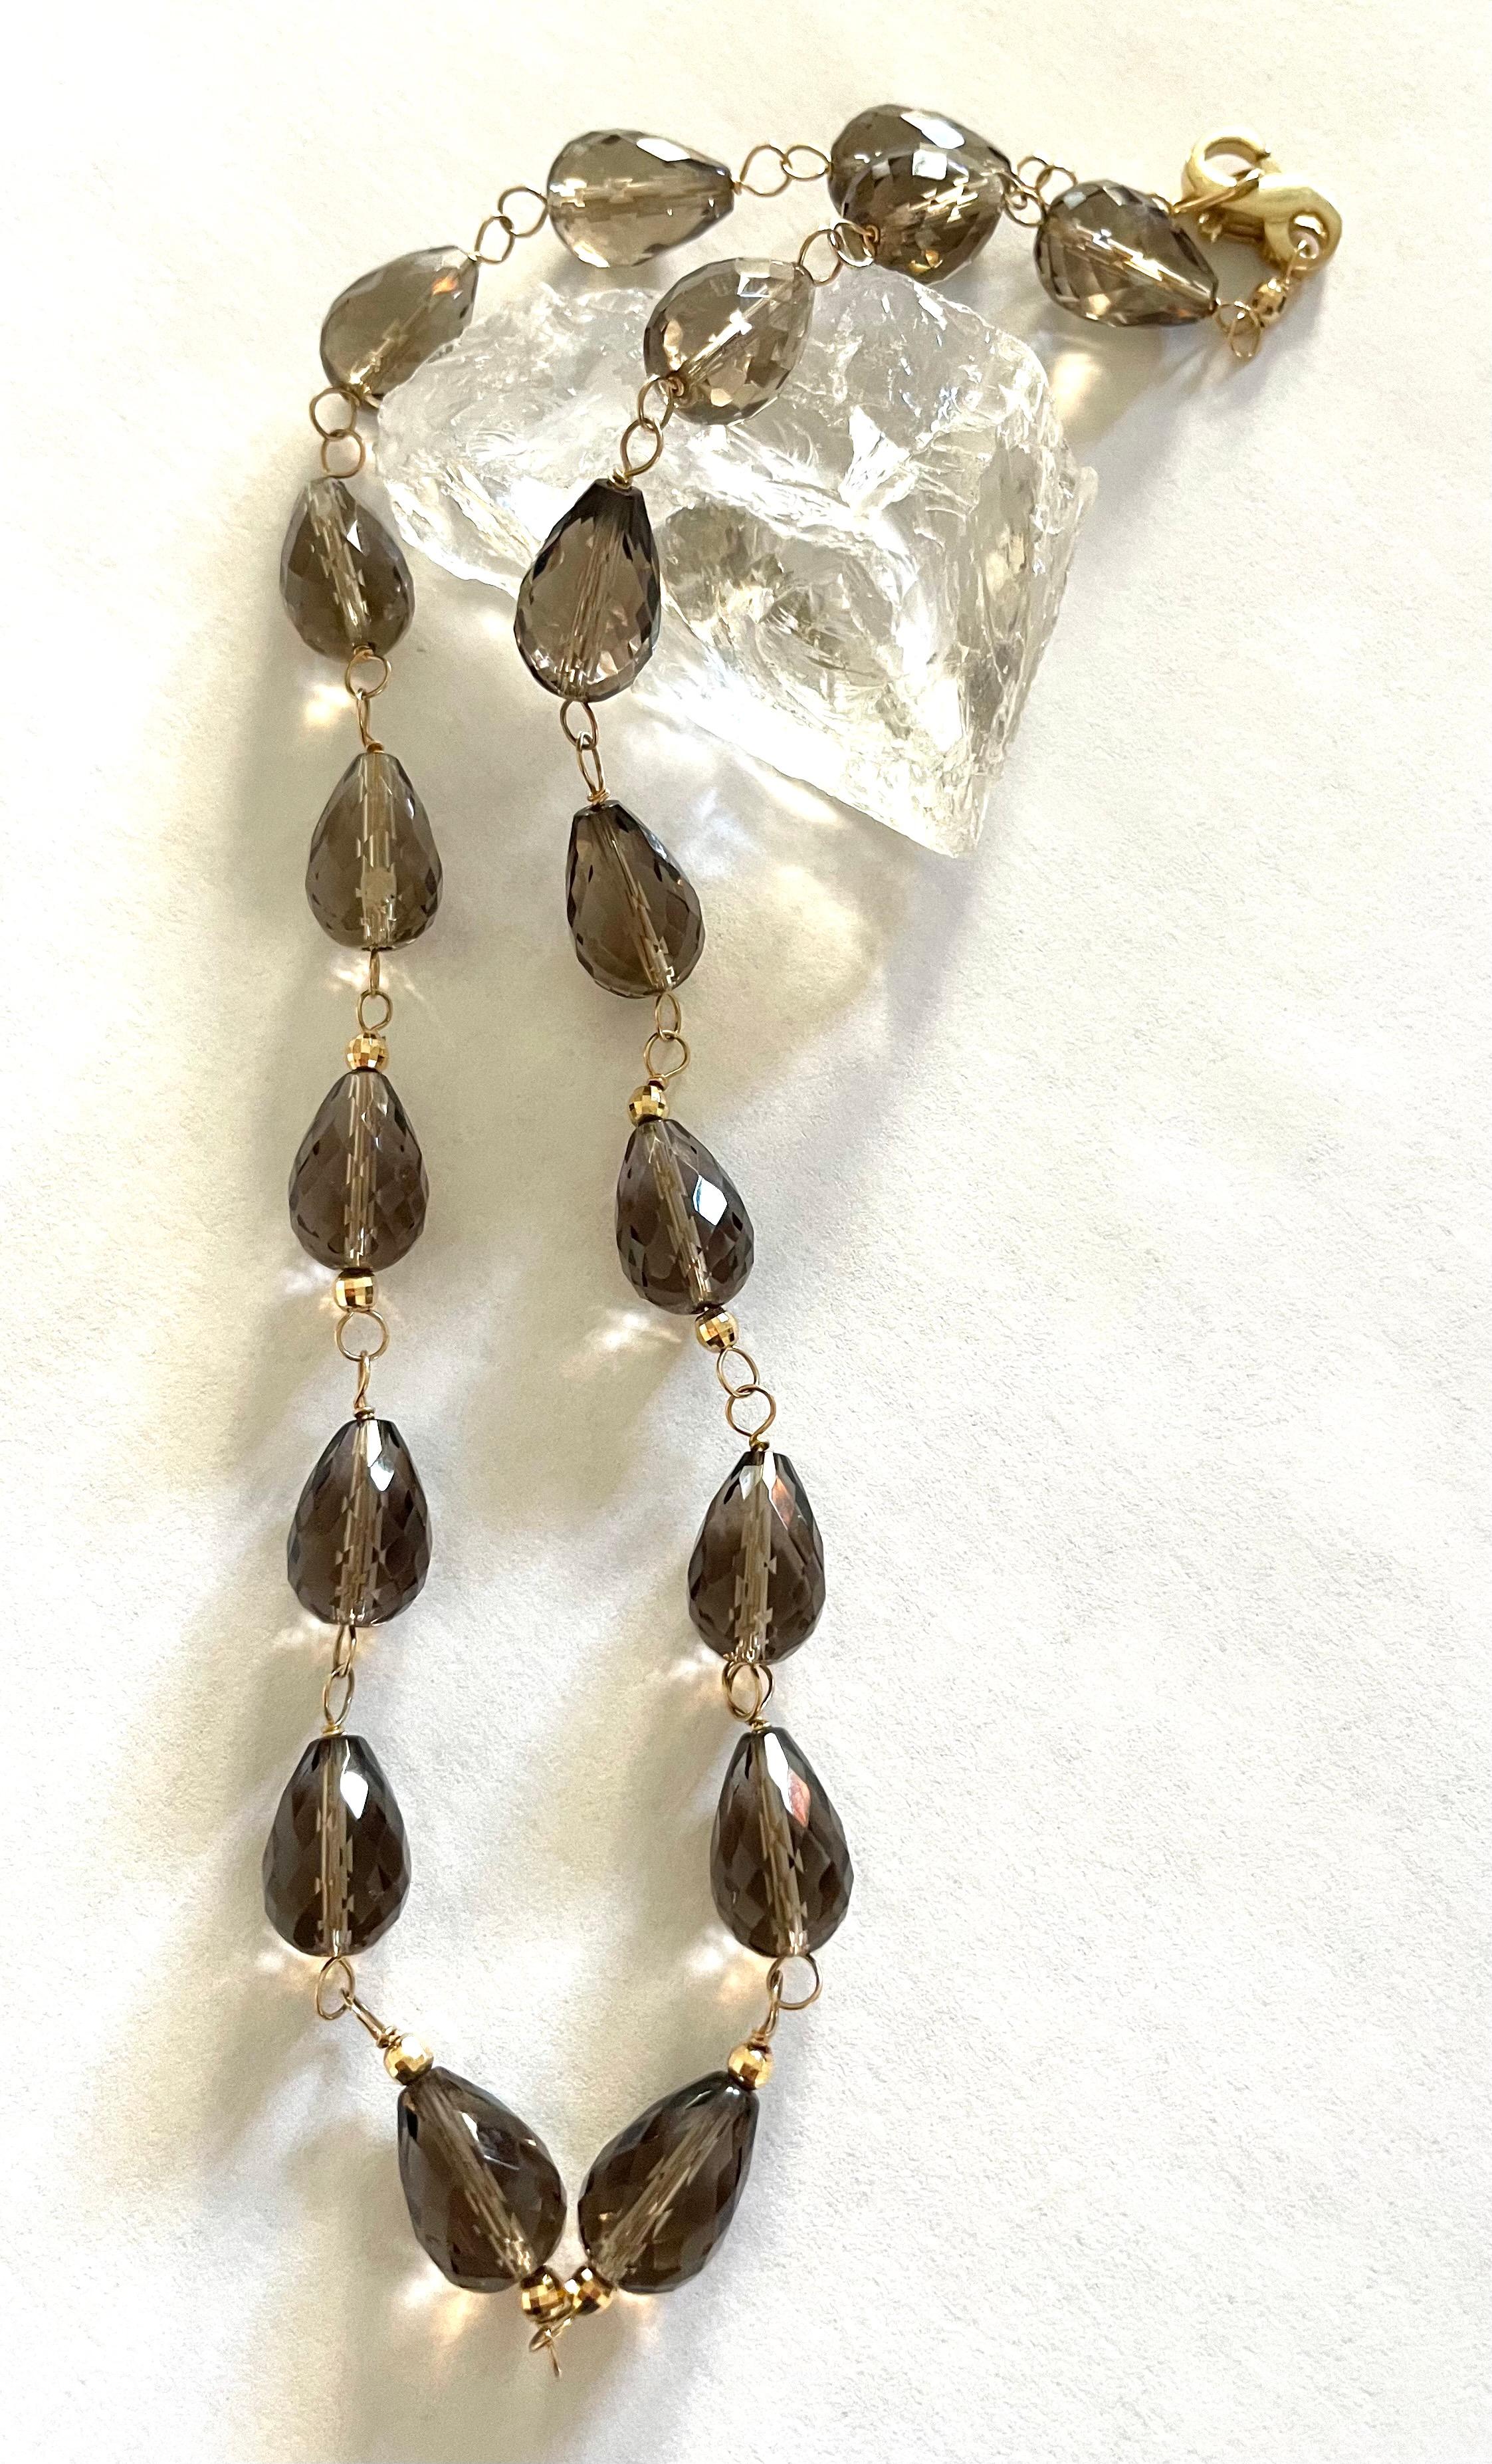 N3767 Smoky Quartz Necklace (correct content)
Description
Strikingly simple and feminine Smoky Quartz necklace with 14k yellow gold accents.
Item # N3767

Materials and Weight
Smoky quartz 9x13mm, 123cts, briolette shape
Faceted 3mm gold balls
14k